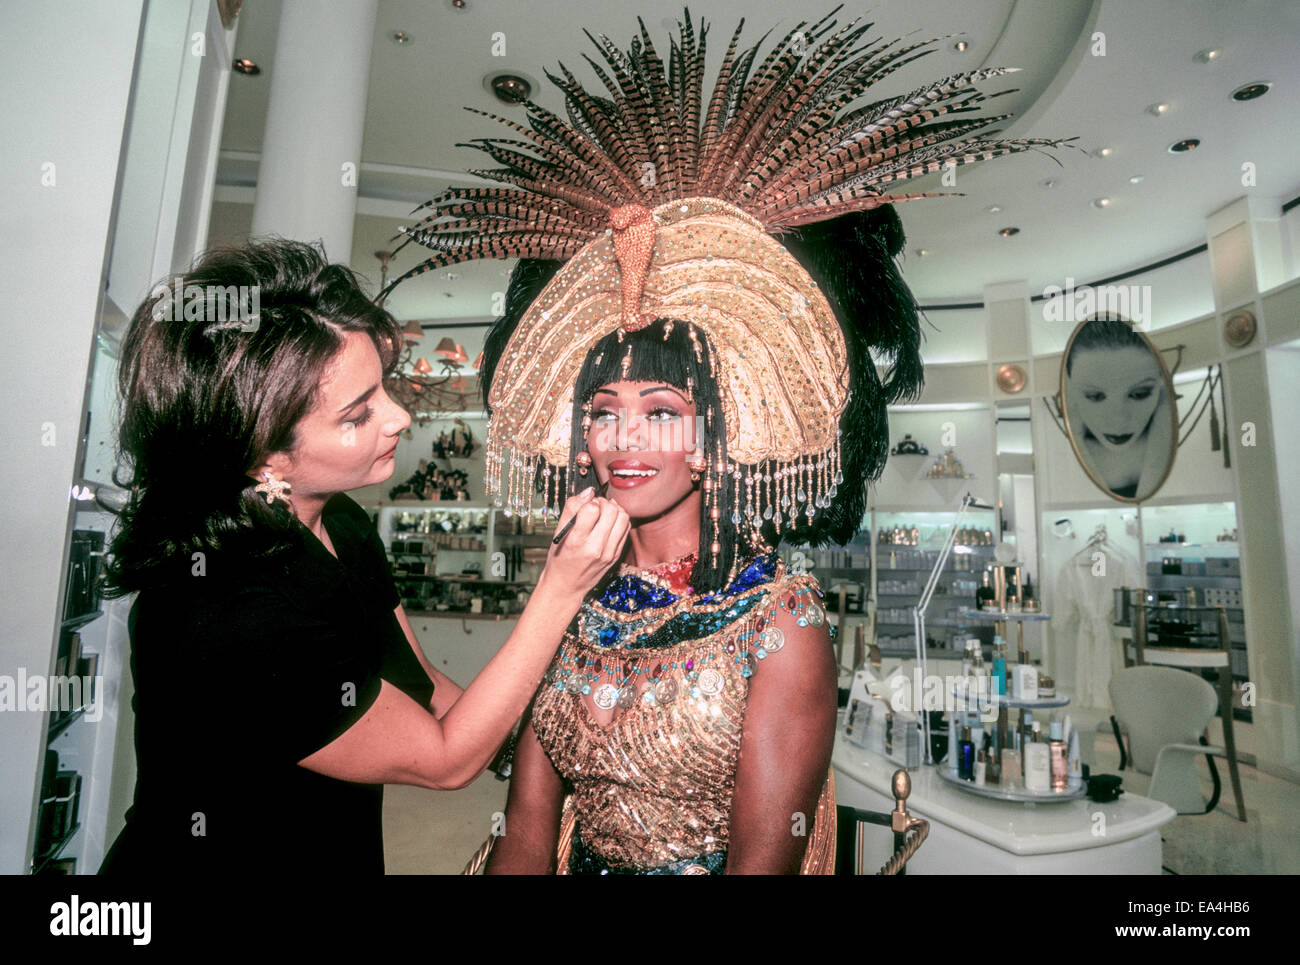 21,605 Estee Lauder Stock Photos, High-Res Pictures, and Images - Getty  Images